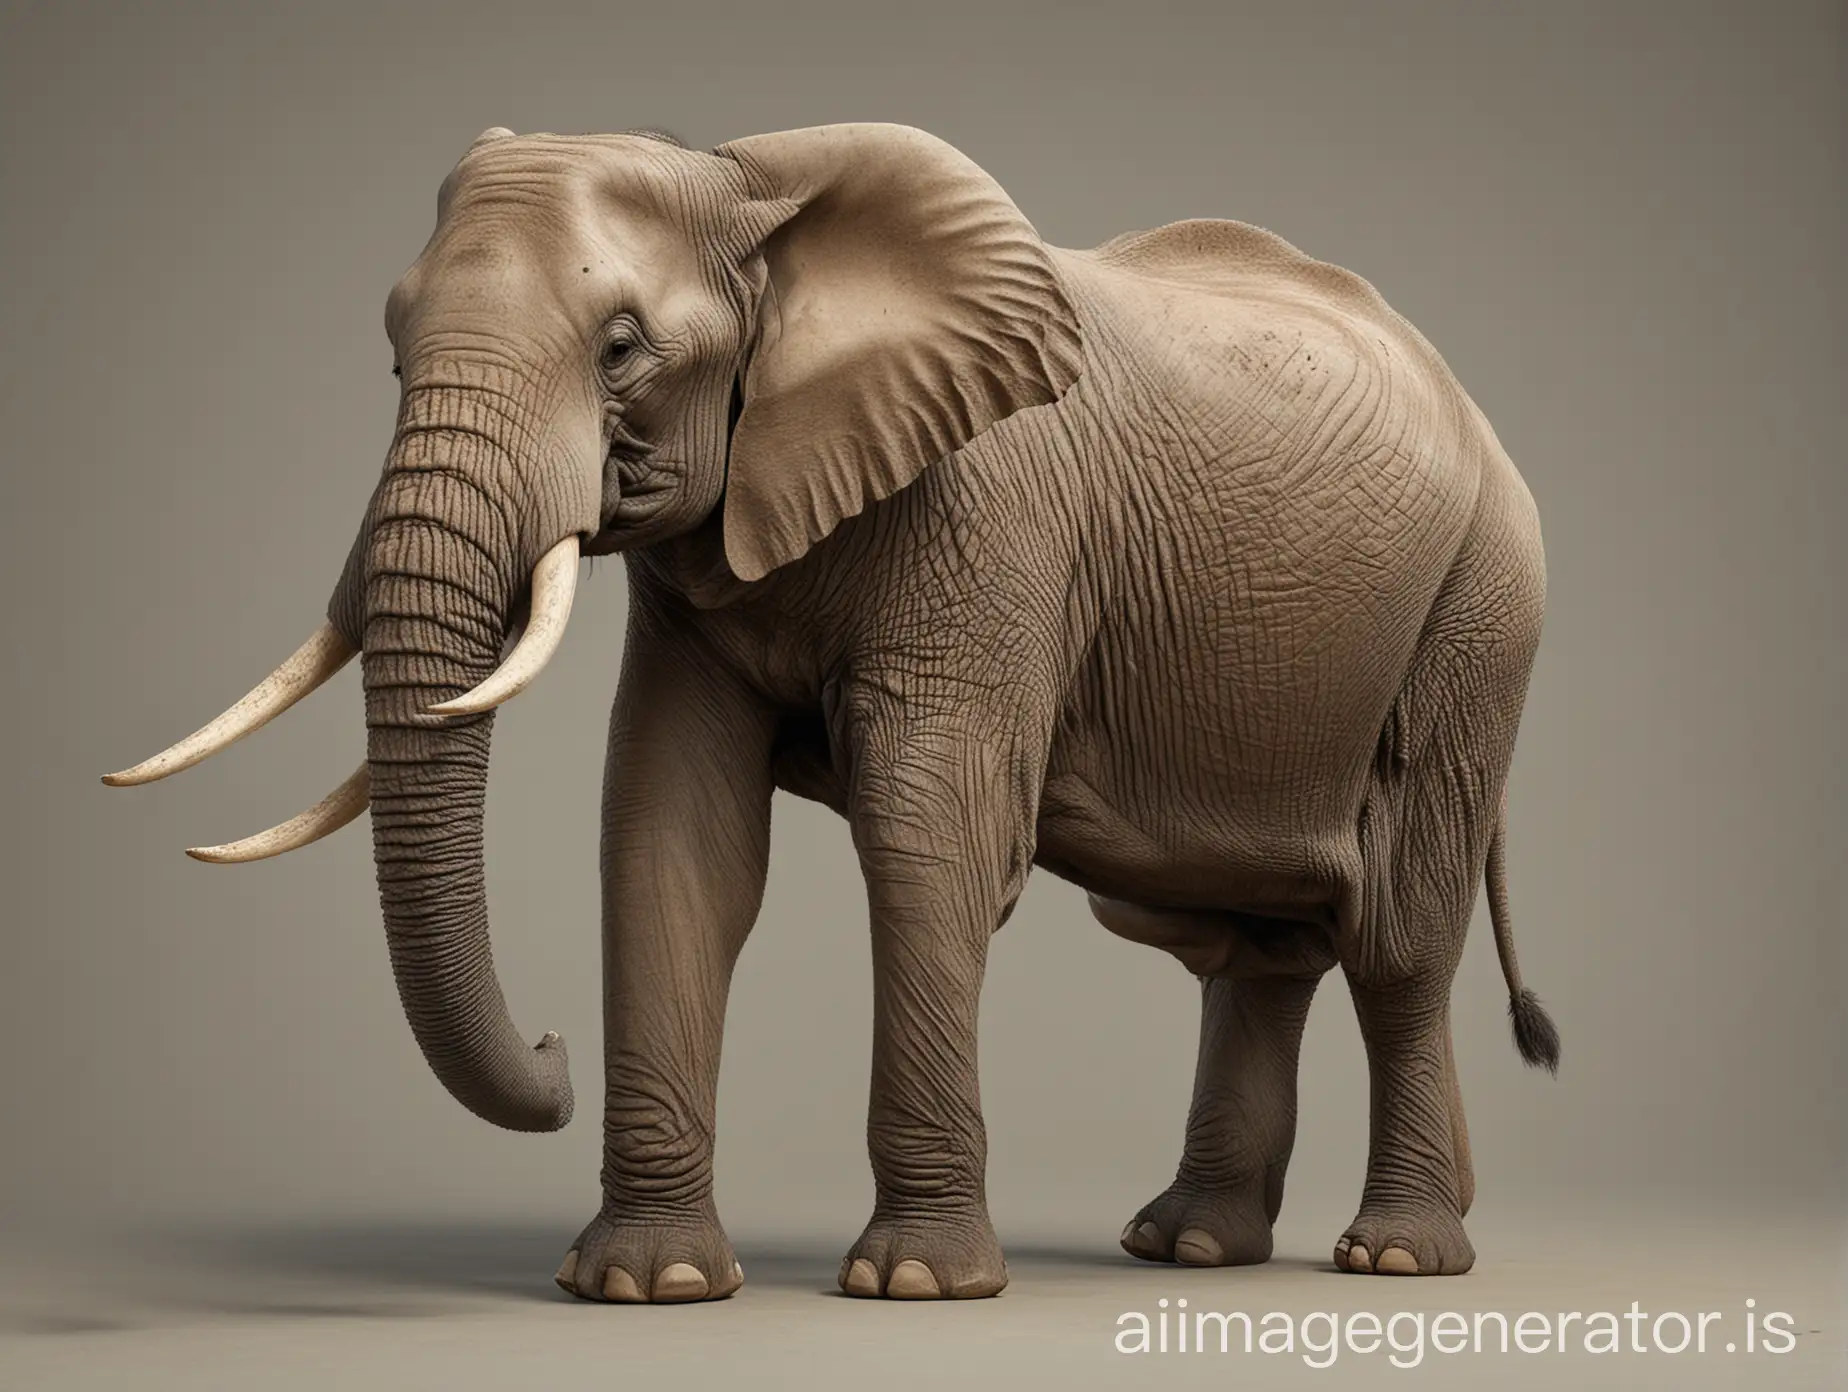 Majestic-Elephant-with-Long-Tusks-in-a-Neutral-Setting